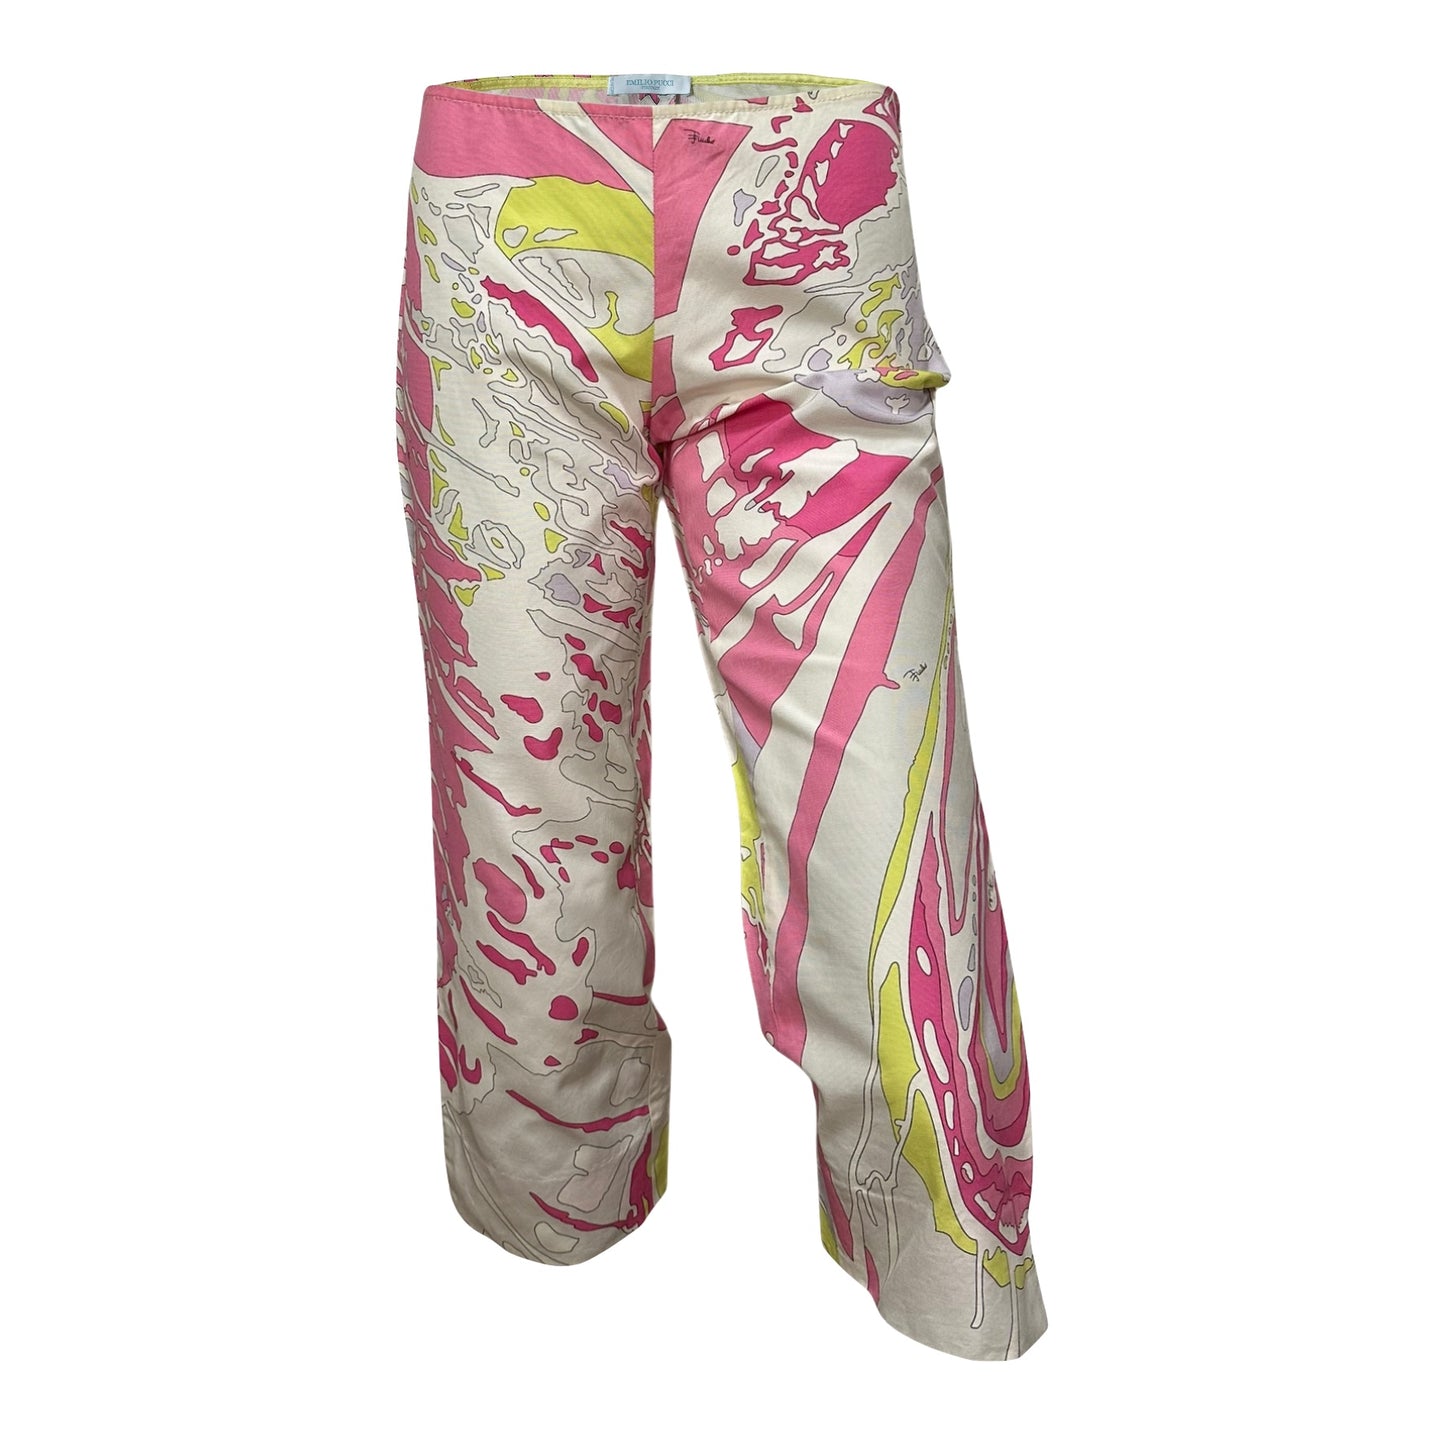 EMILIO PUCCI Spring Summer 2006 Cropped Pants